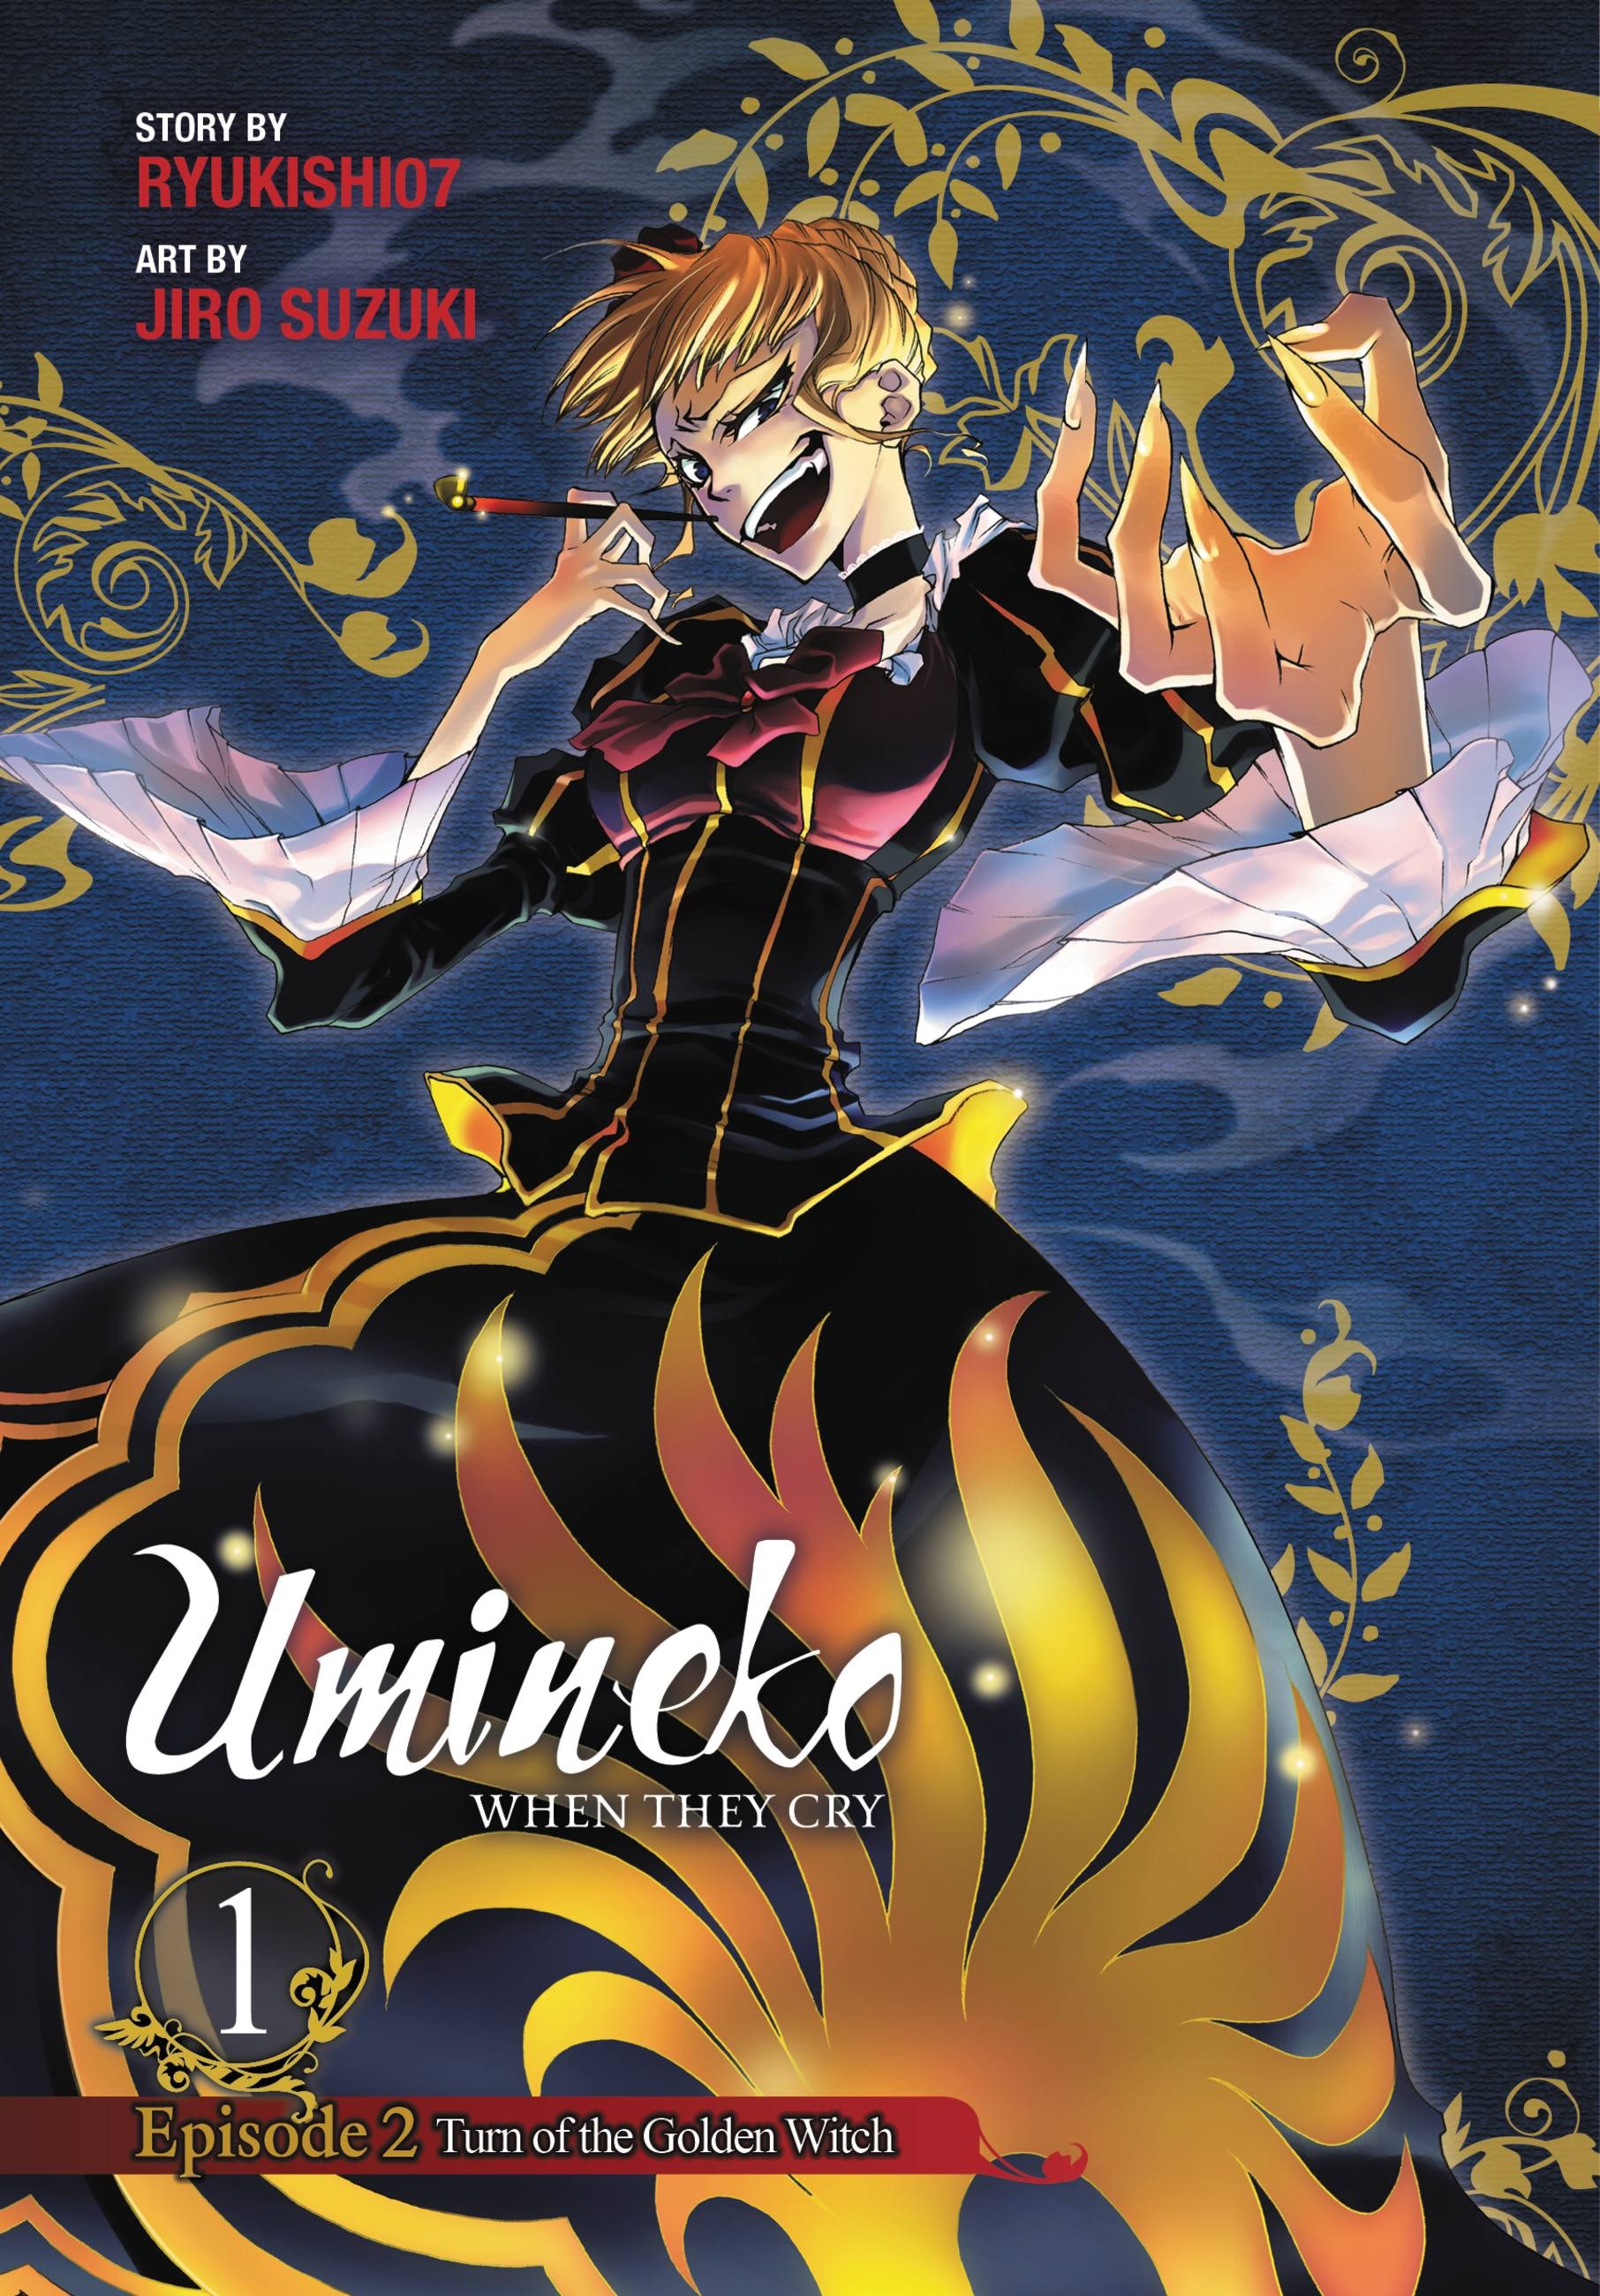 Product Image: Umineko WHEN THEY CRY Episode 2: Turn of the Golden Witch, Vol. 1